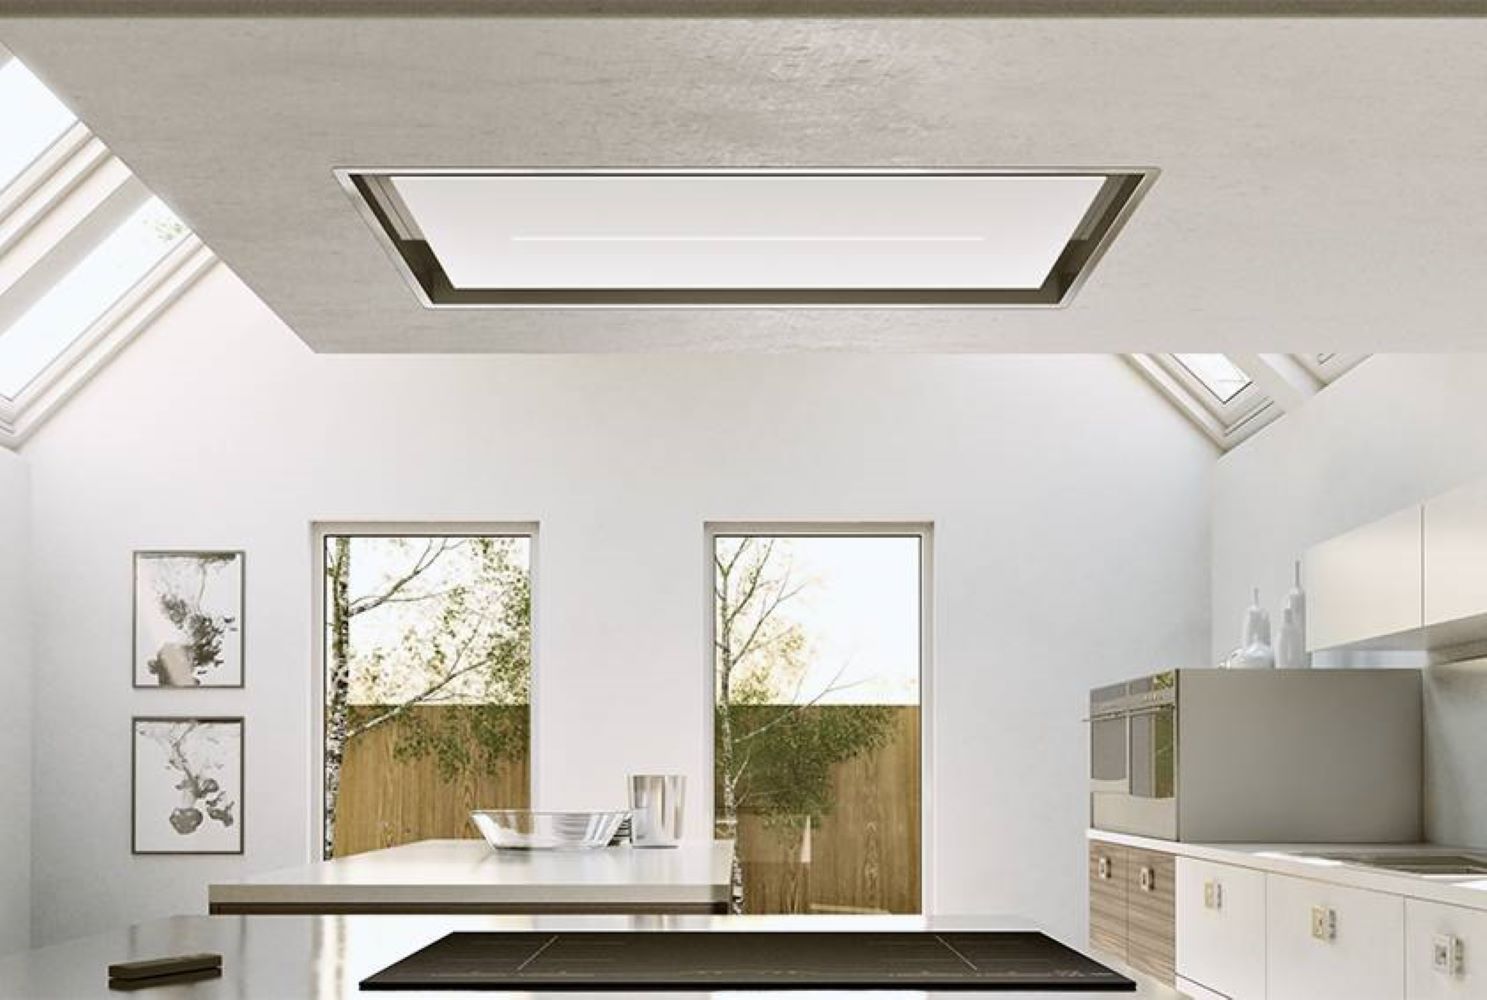 Airforce Sinergia 100cm Premium Ceiling Cooker Hood - Stainless Steel and Glass - Devine Distribution Ltd